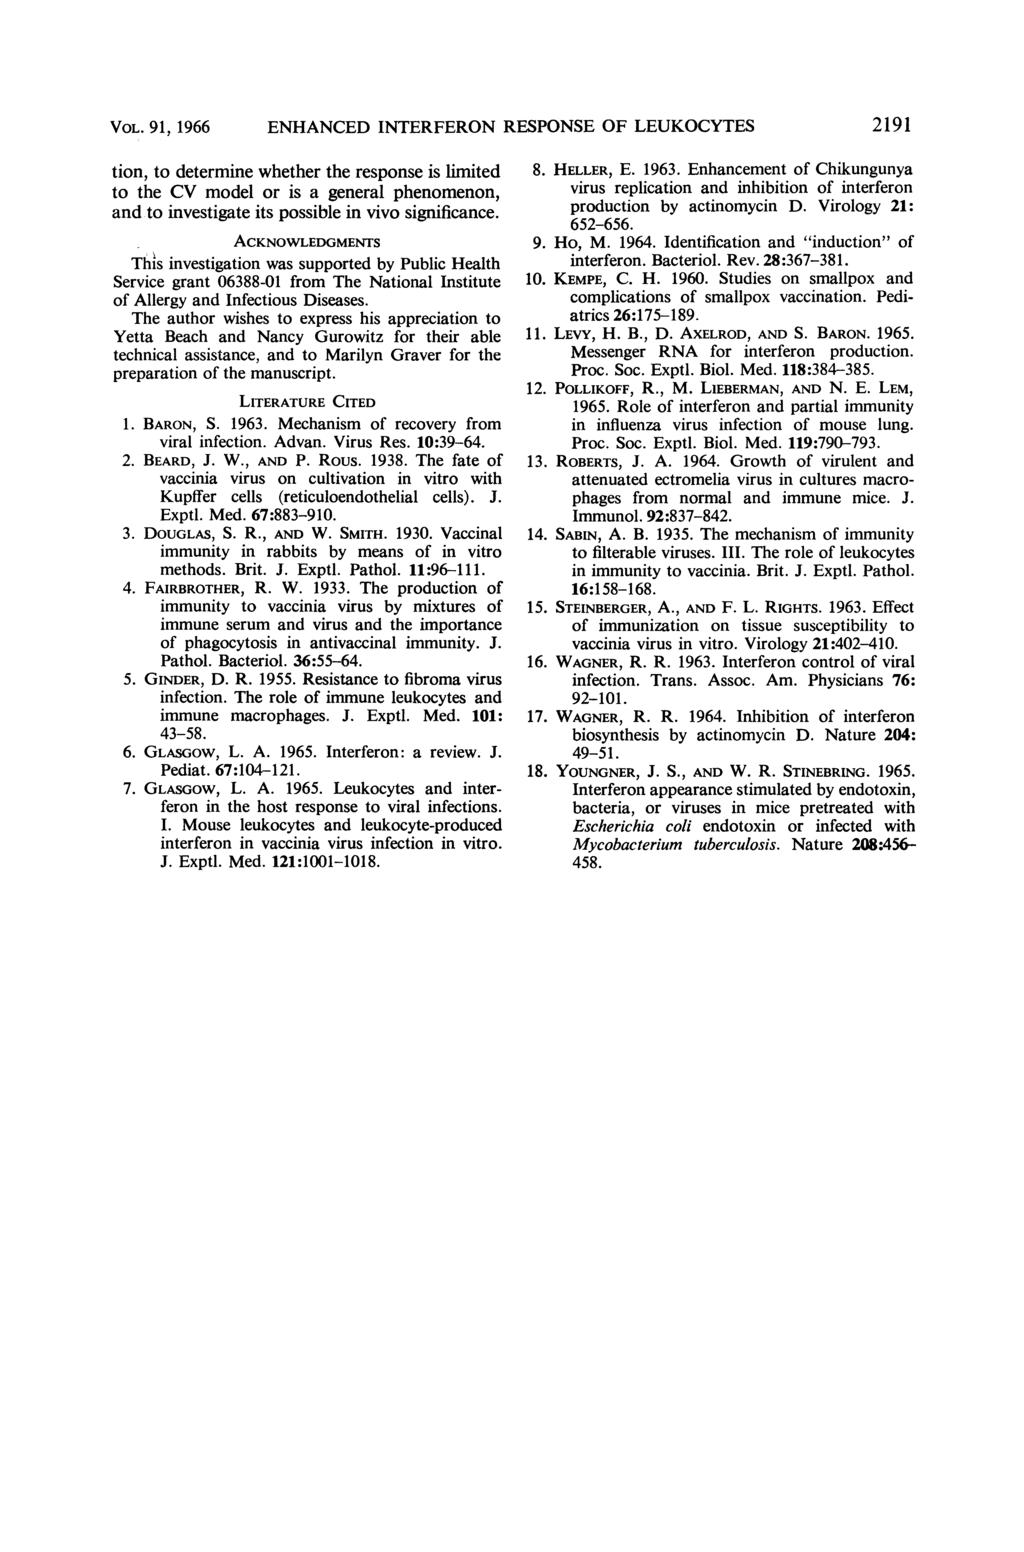 VOL. 91, 1966 ENHANCED INTERFERON RESPONSE OF 2191 tion, to determine whether the response is limited to the CV model or is a general phenomenon, and to investigate its possible in vivo significance.